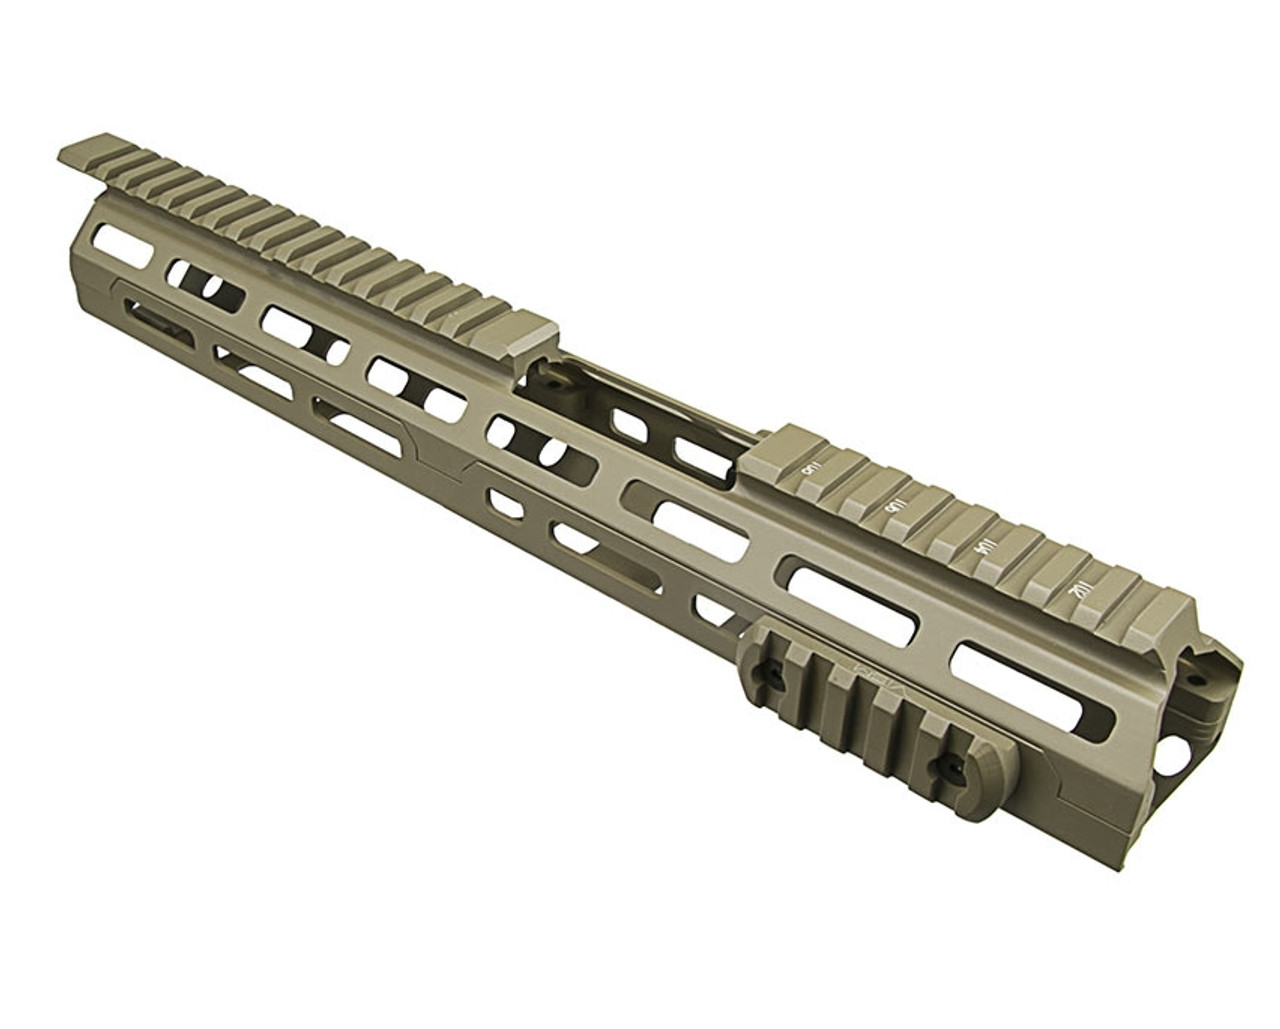 NcSTAR VMARMLCET 223/556  M-Lok Handguard/ Two Piece/ Drop In Fit/ Extended Length/ 13.5"L Tan